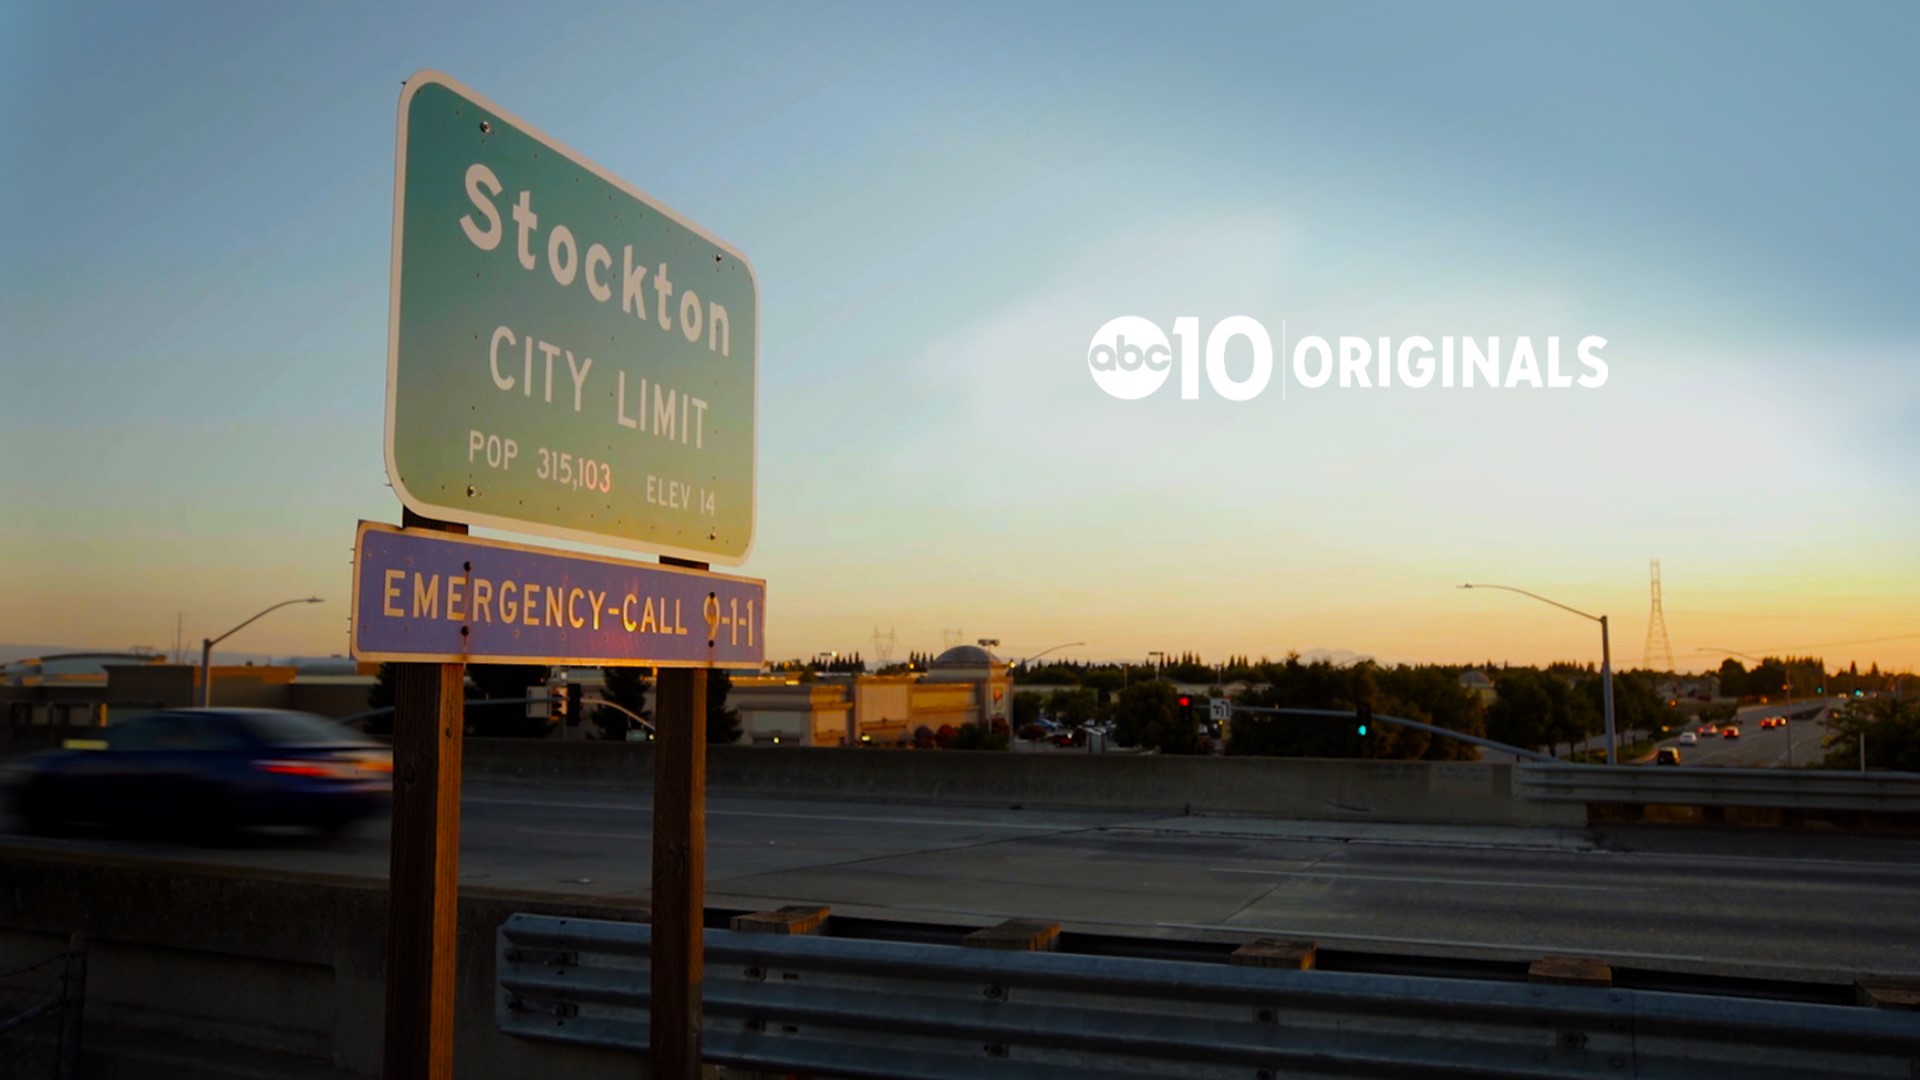 Stockton Police say the majority of the city's violent crime is gang-related, but some disagree. ABC10's Michael Anthony Adams took a closer look at the gang history in the city.